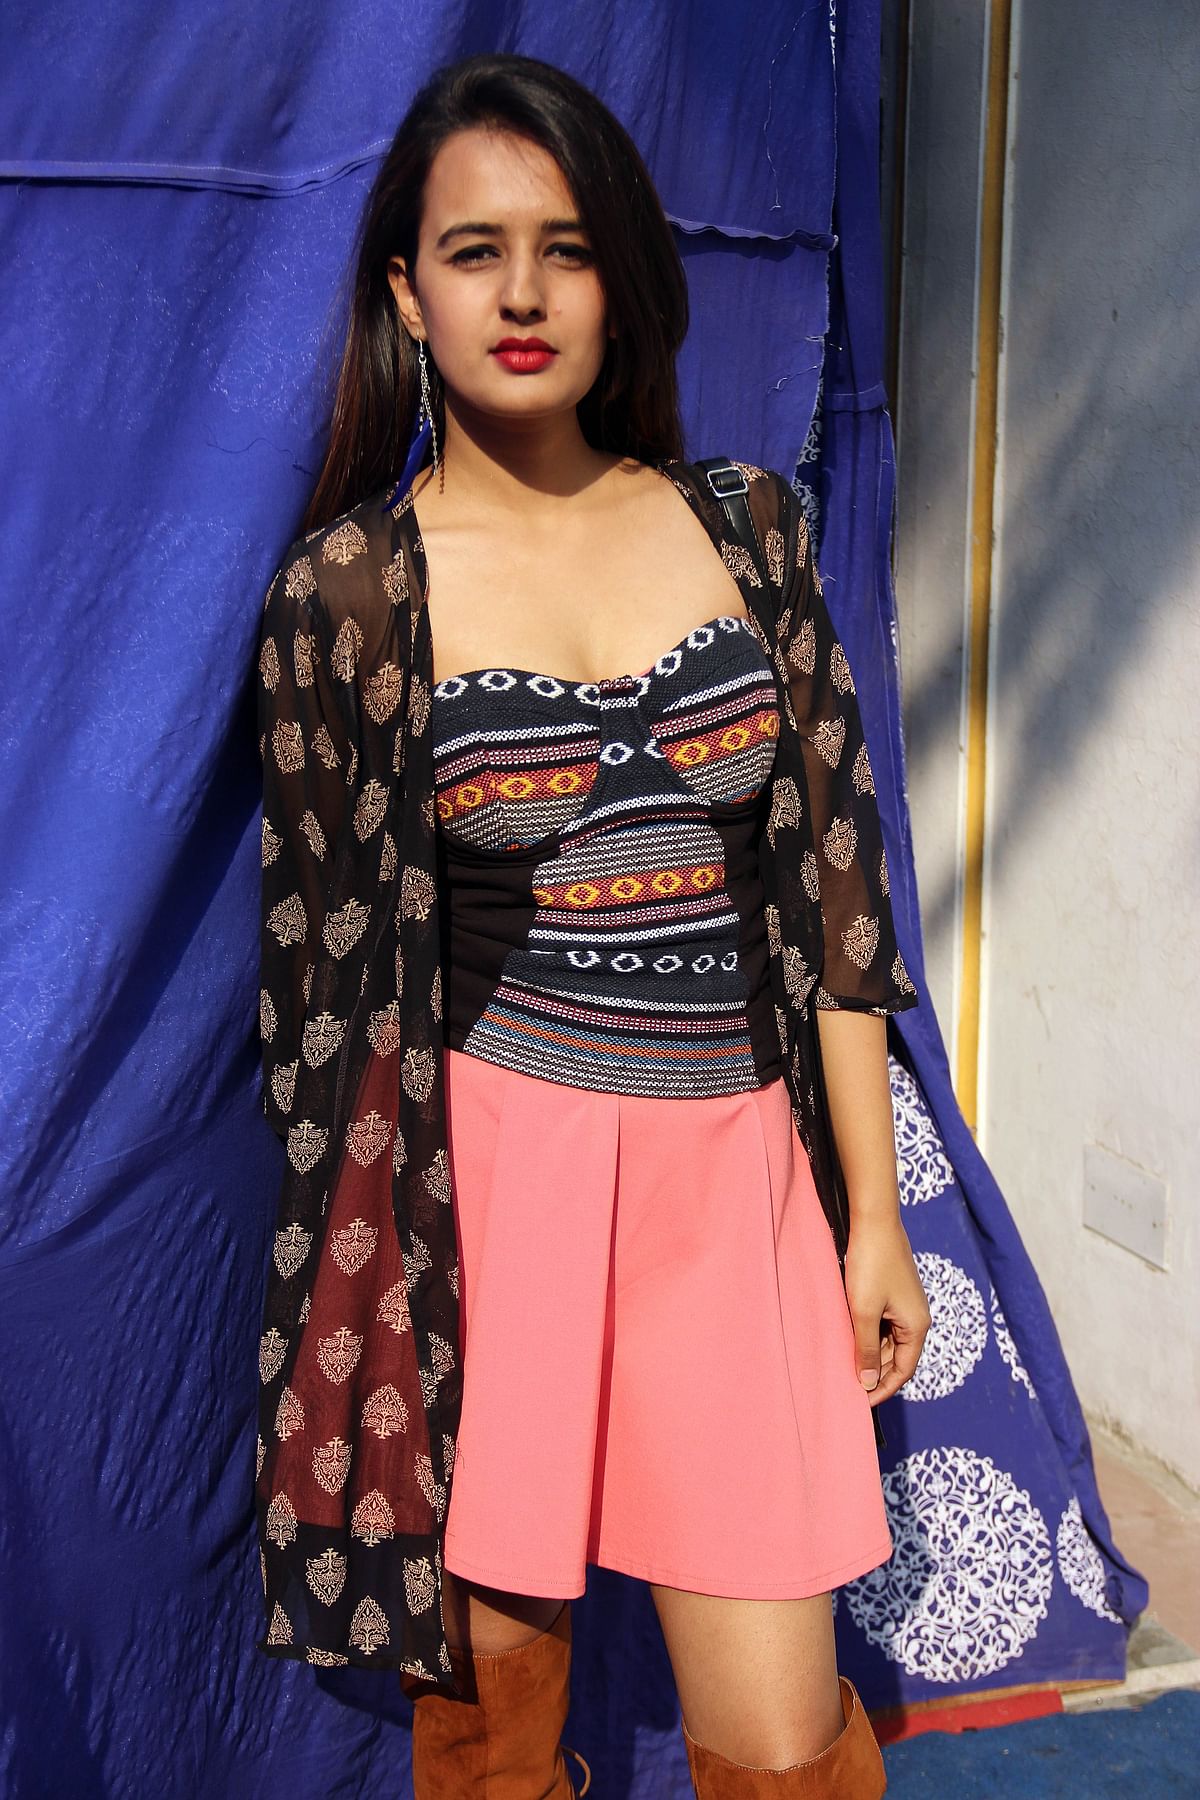 We bring you the understated, confident styles – and a dash of pink – from the Jaipur Literature Festival.